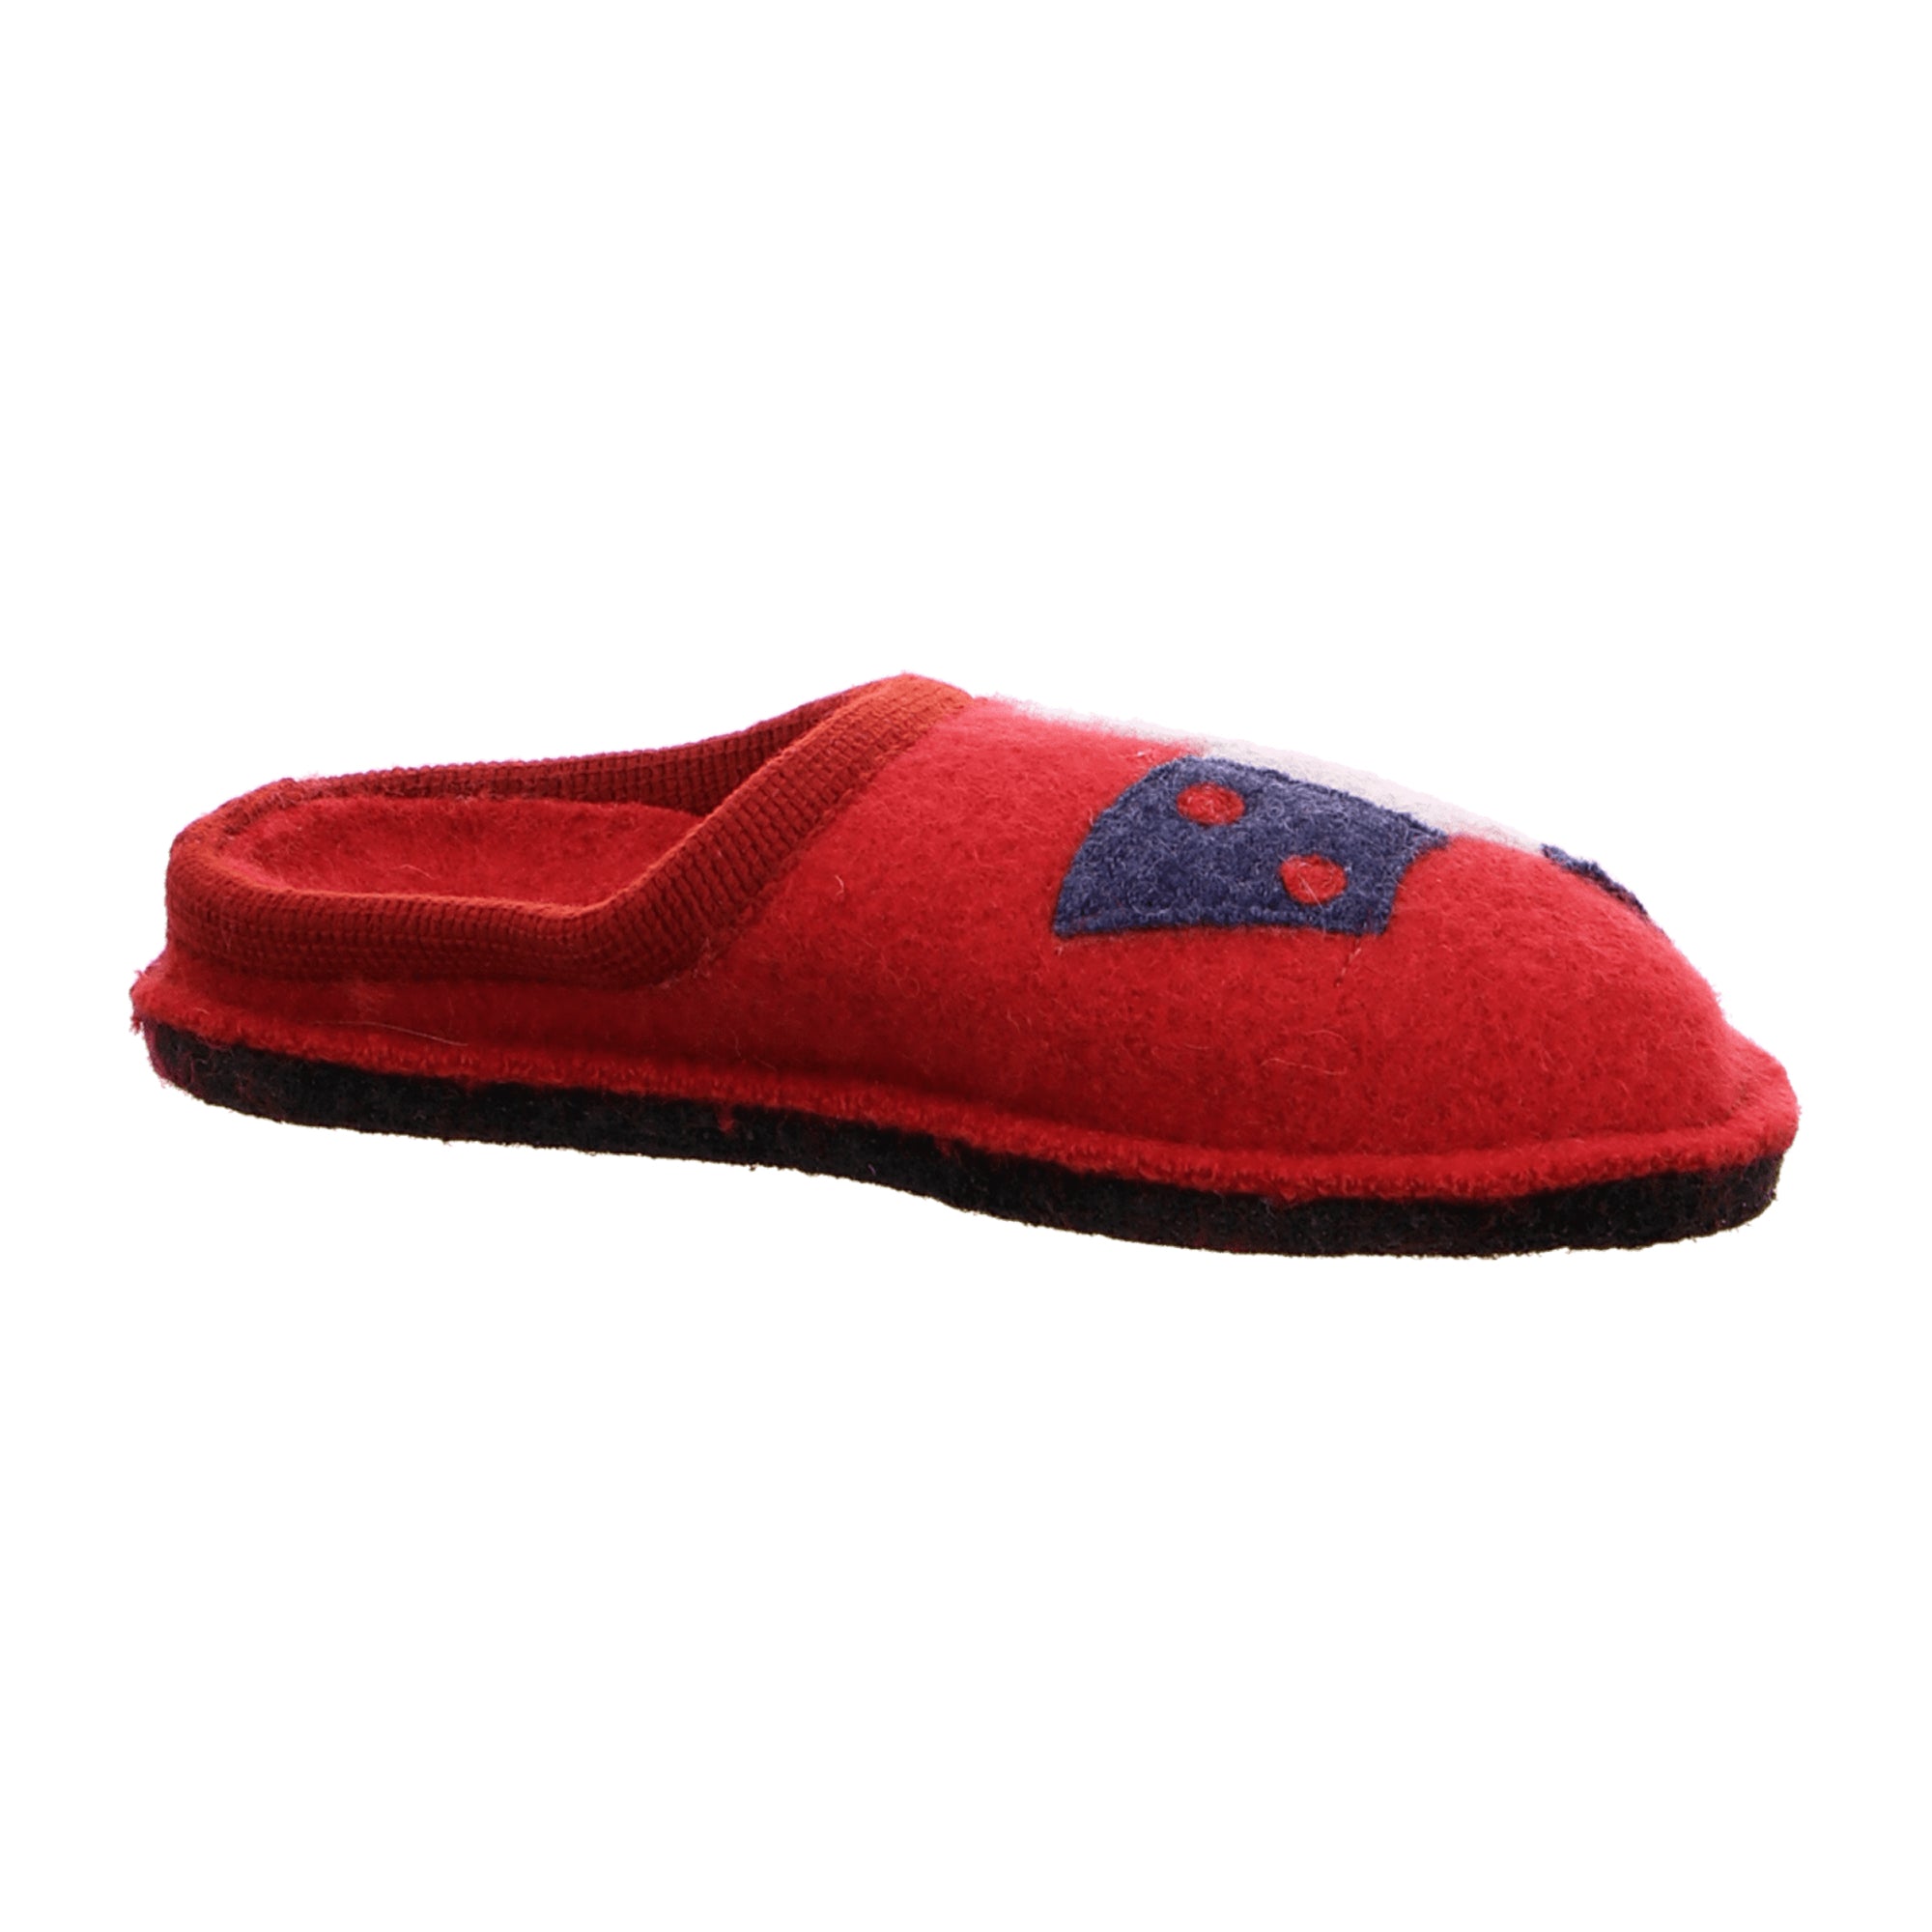 Haflinger Flair Women's Red Slippers - Comfortable & Stylish Footwear